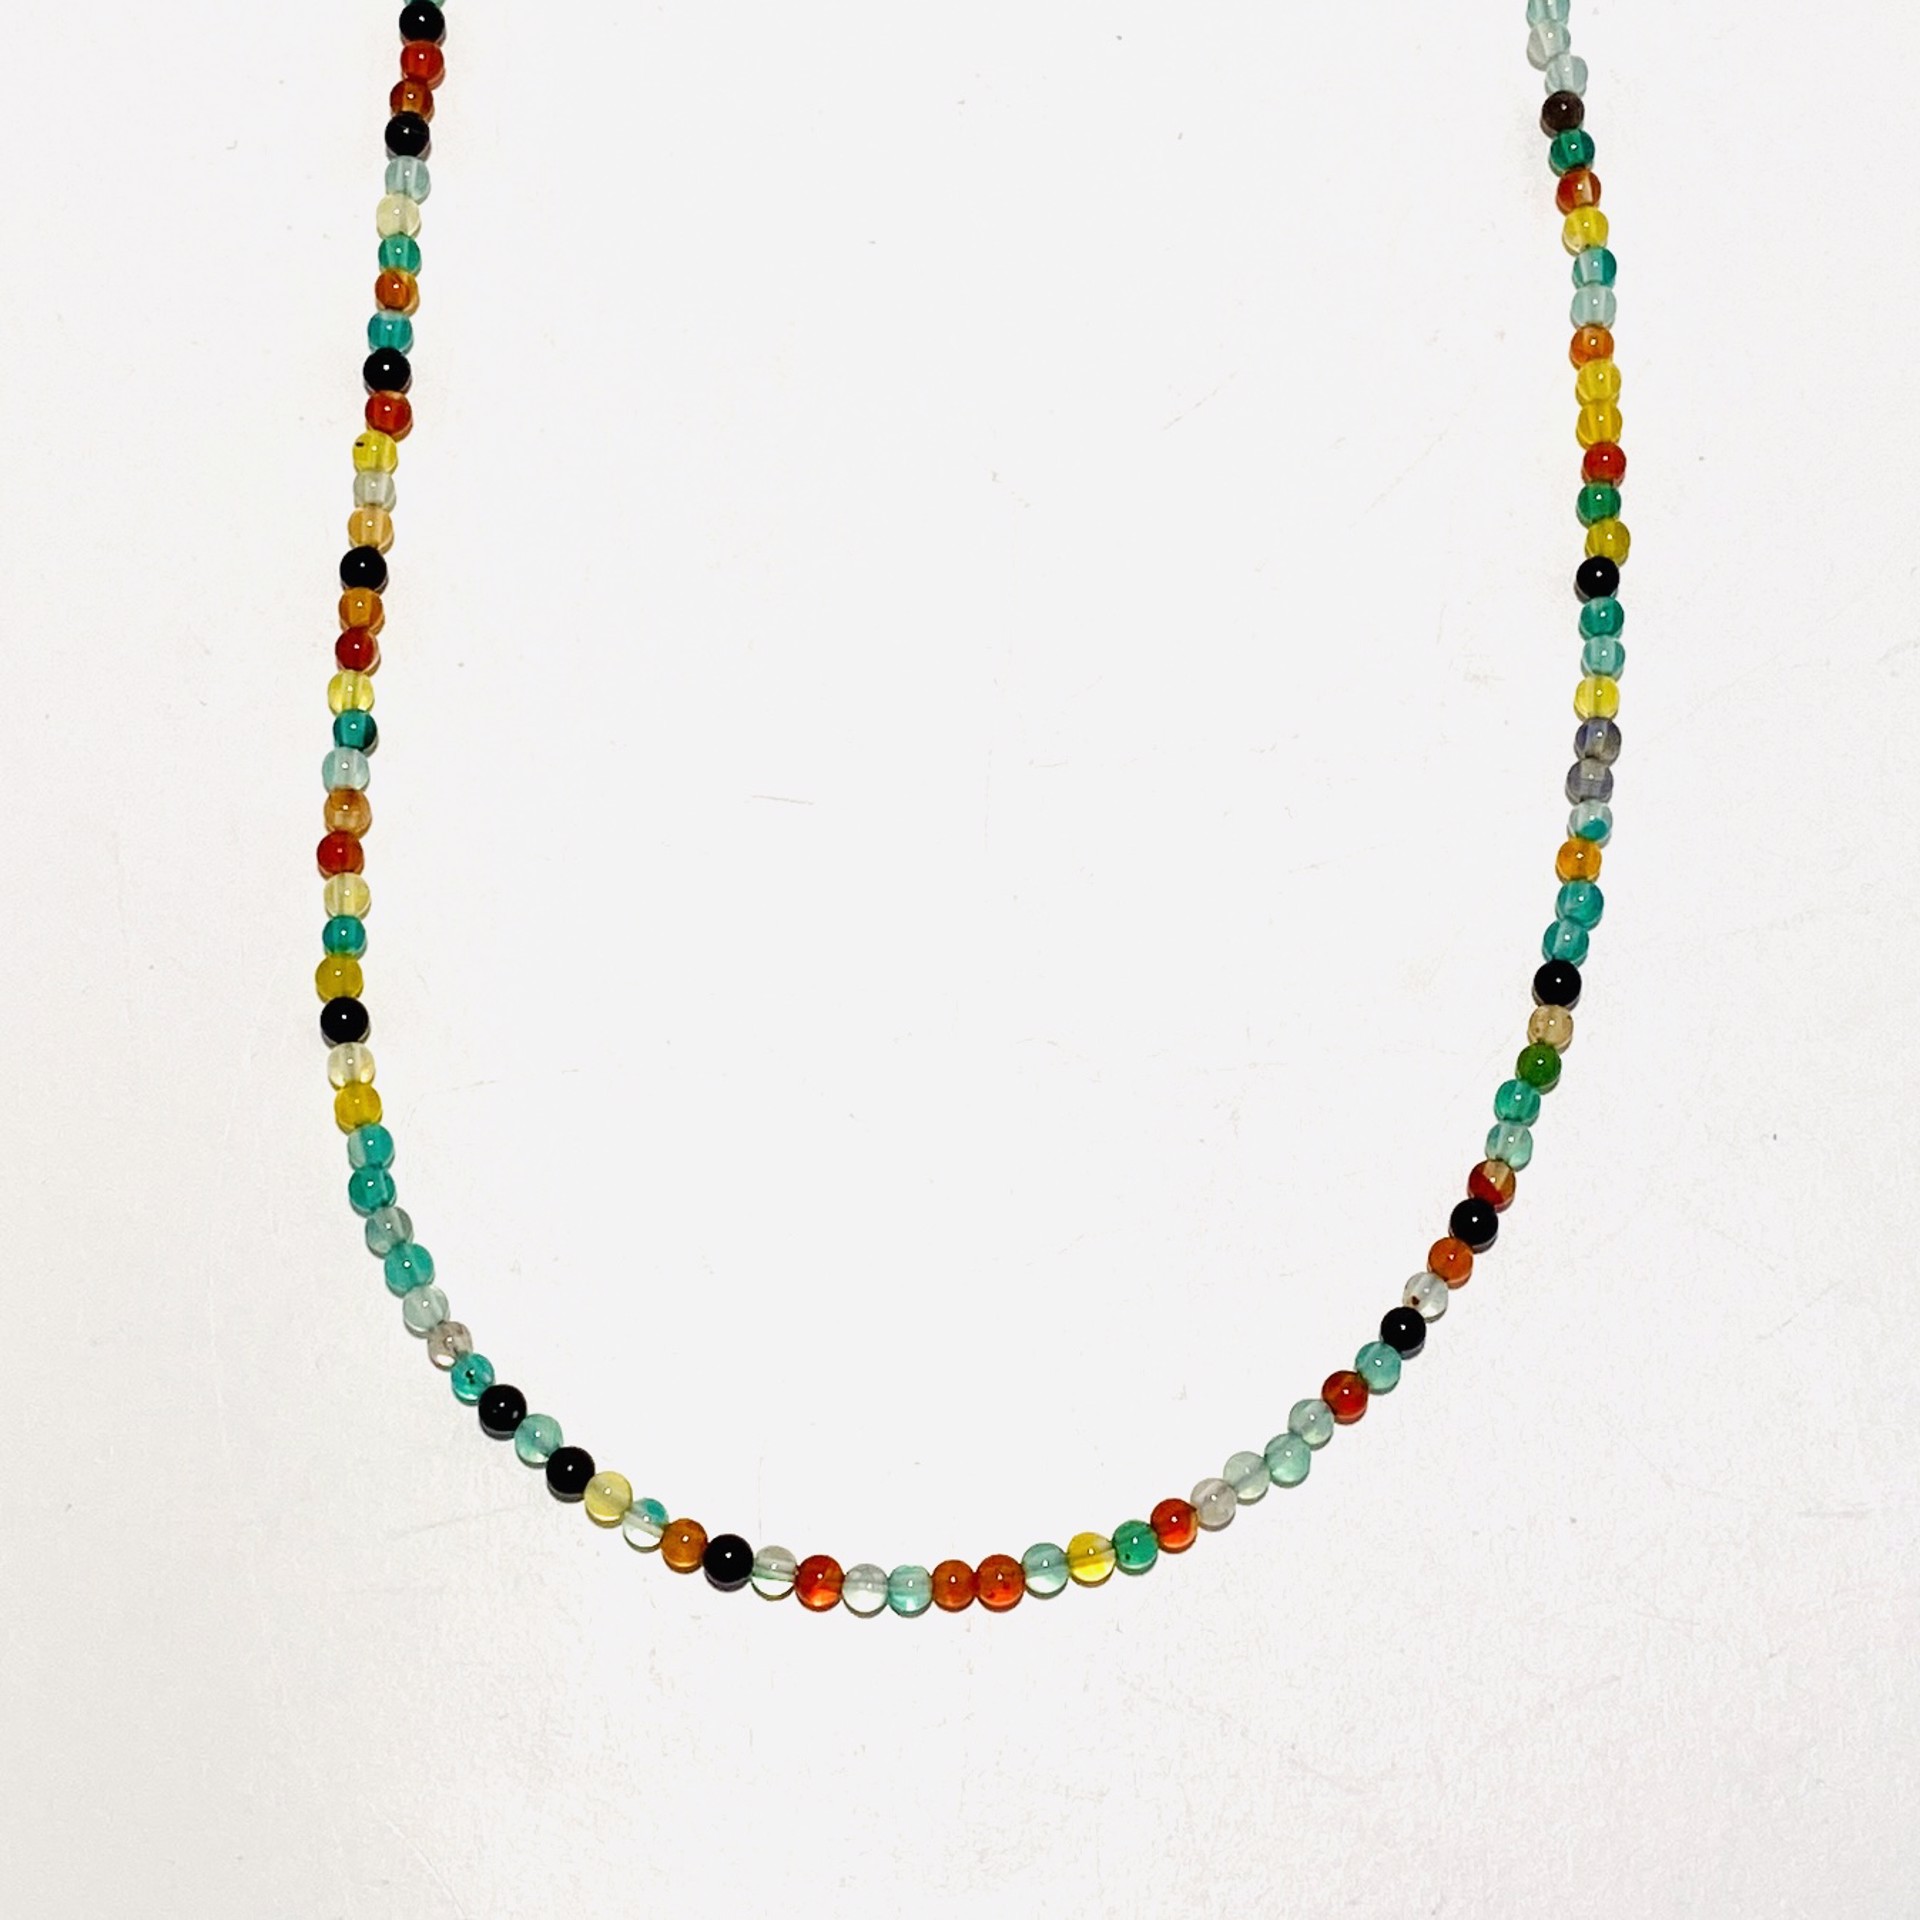 Faceted Tiny Mixed Gemstones Strand Necklace NT23-52 by Nance Trueworthy